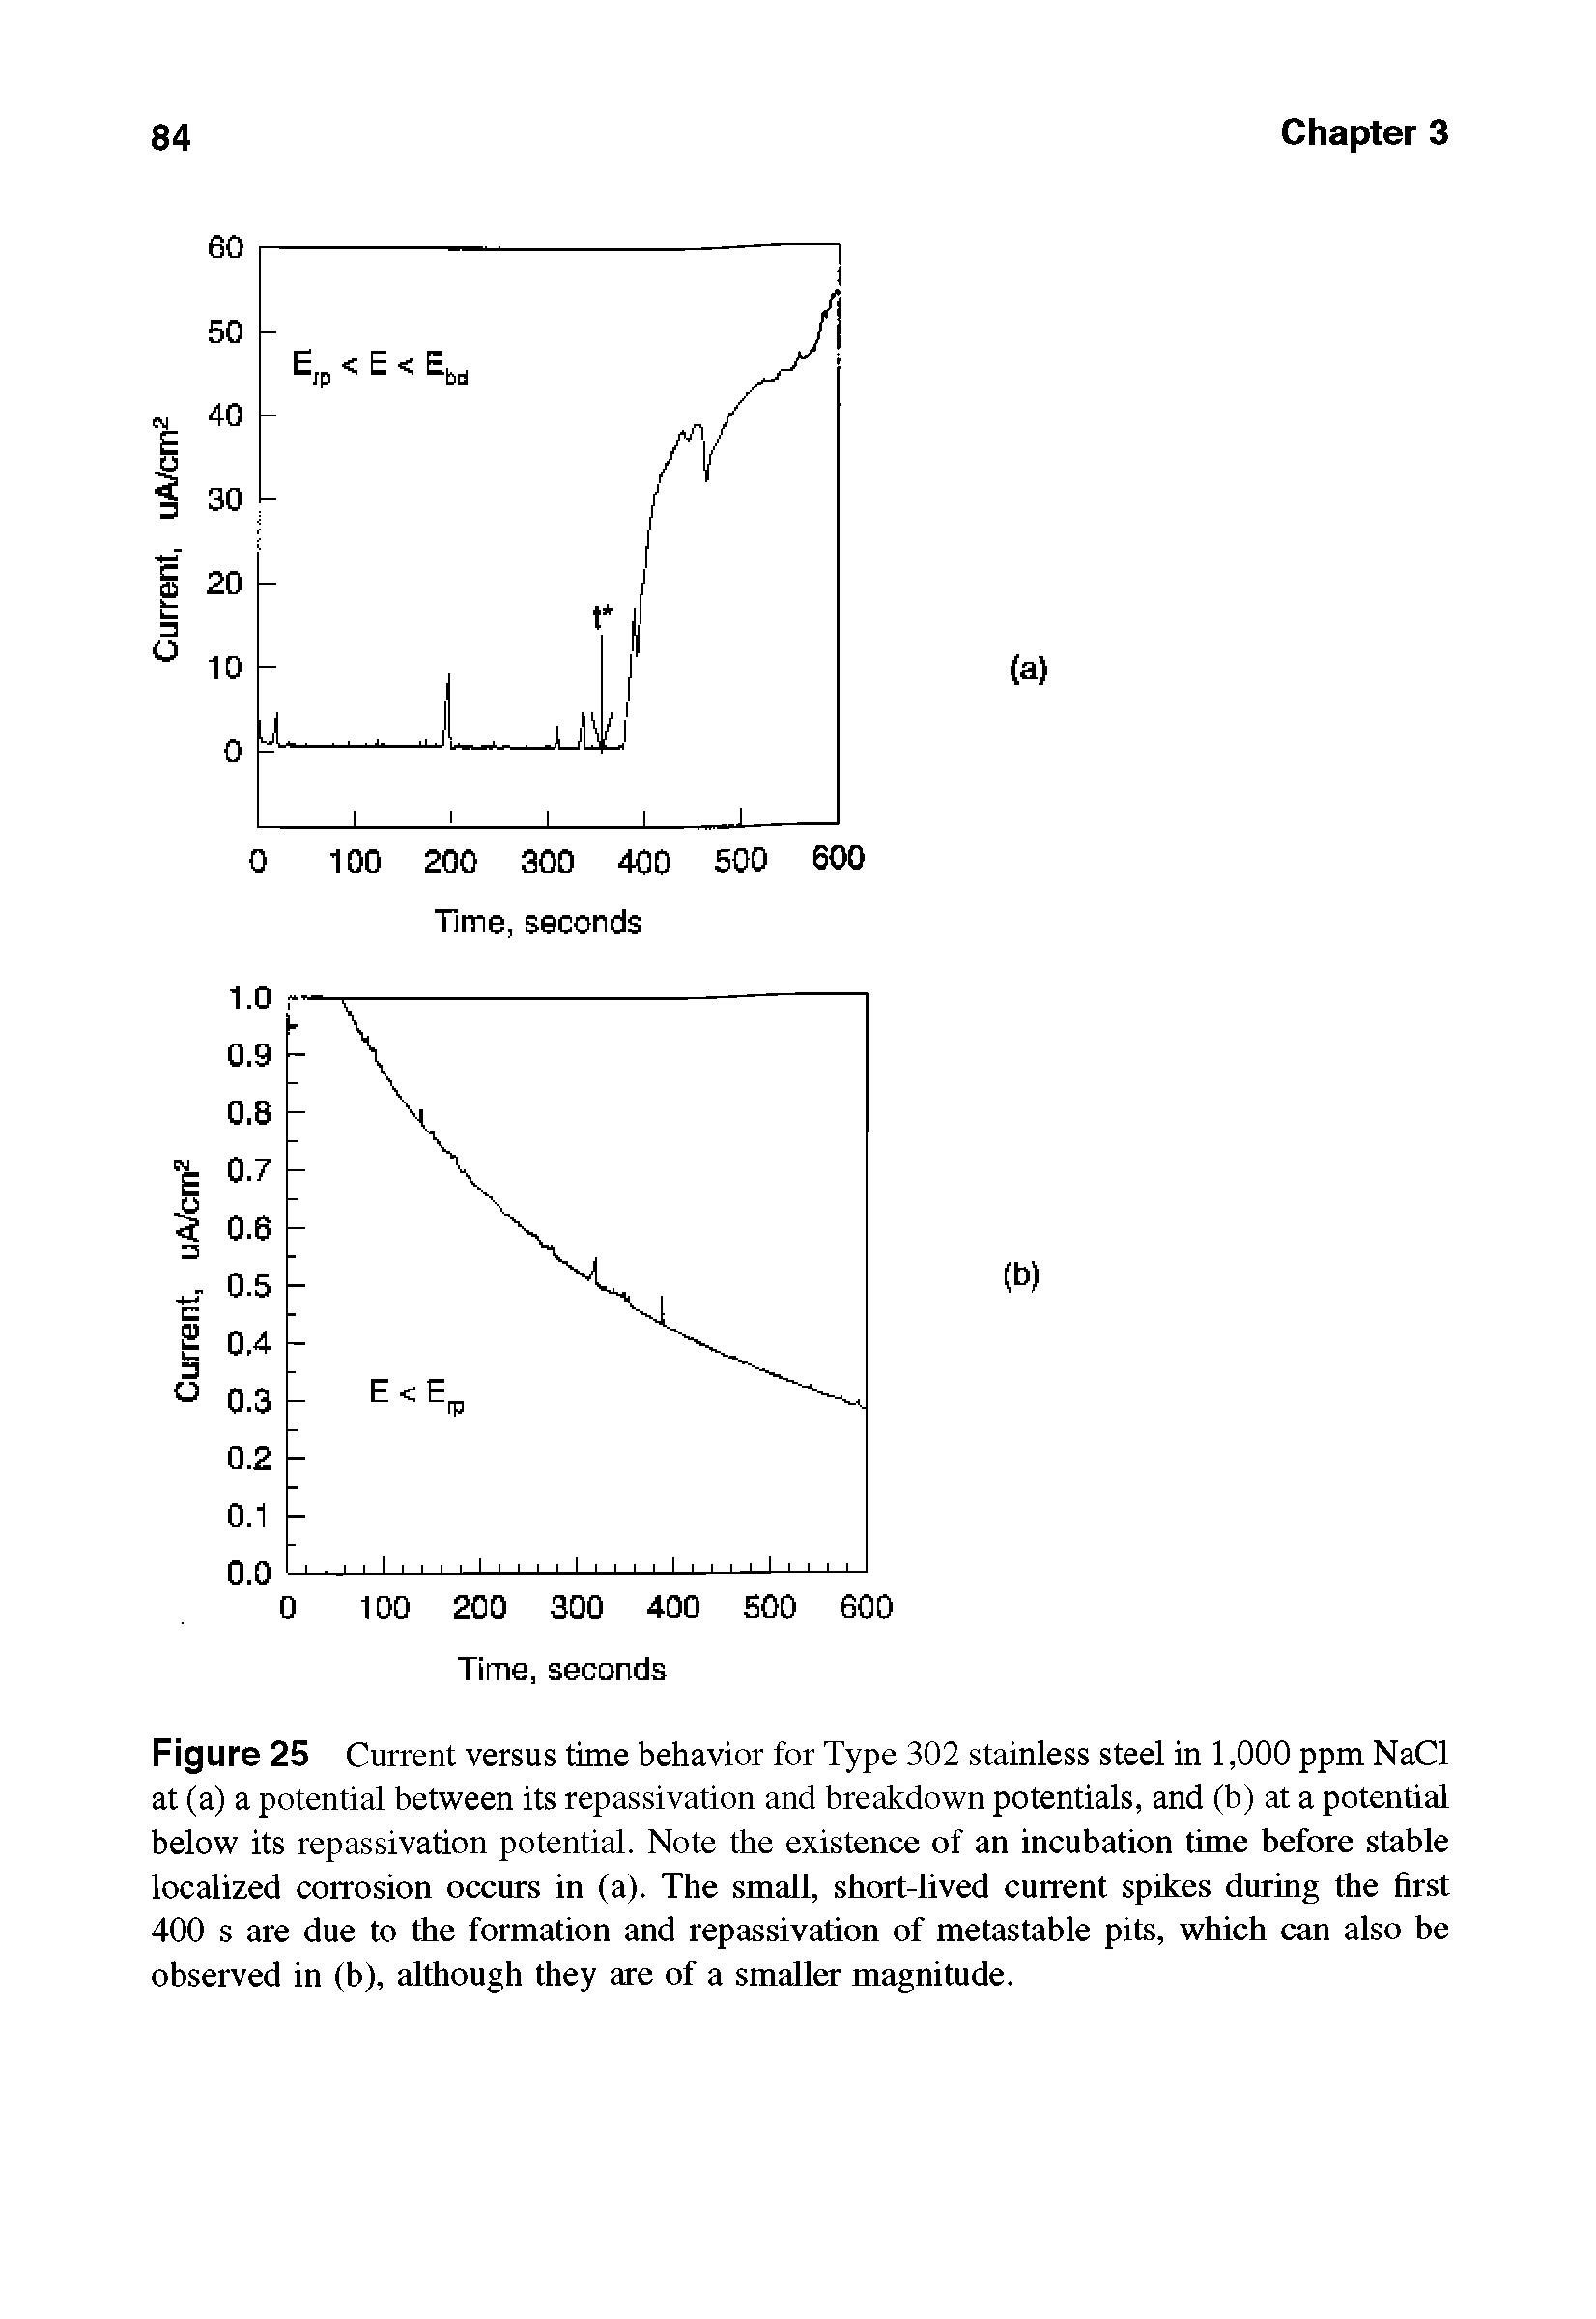 Figure 25 Current versus time behavior for Type 302 stainless steel in 1,000 ppm NaCl at (a) a potential between its repassivation and breakdown potentials, and (b) at a potential below its repassivation potential. Note the existence of an incubation time before stable localized corrosion occurs in (a). The small, short-lived current spikes during the first 400 s are due to the formation and repassivation of metastable pits, which can also be observed in (b), although they are of a smaller magnitude.